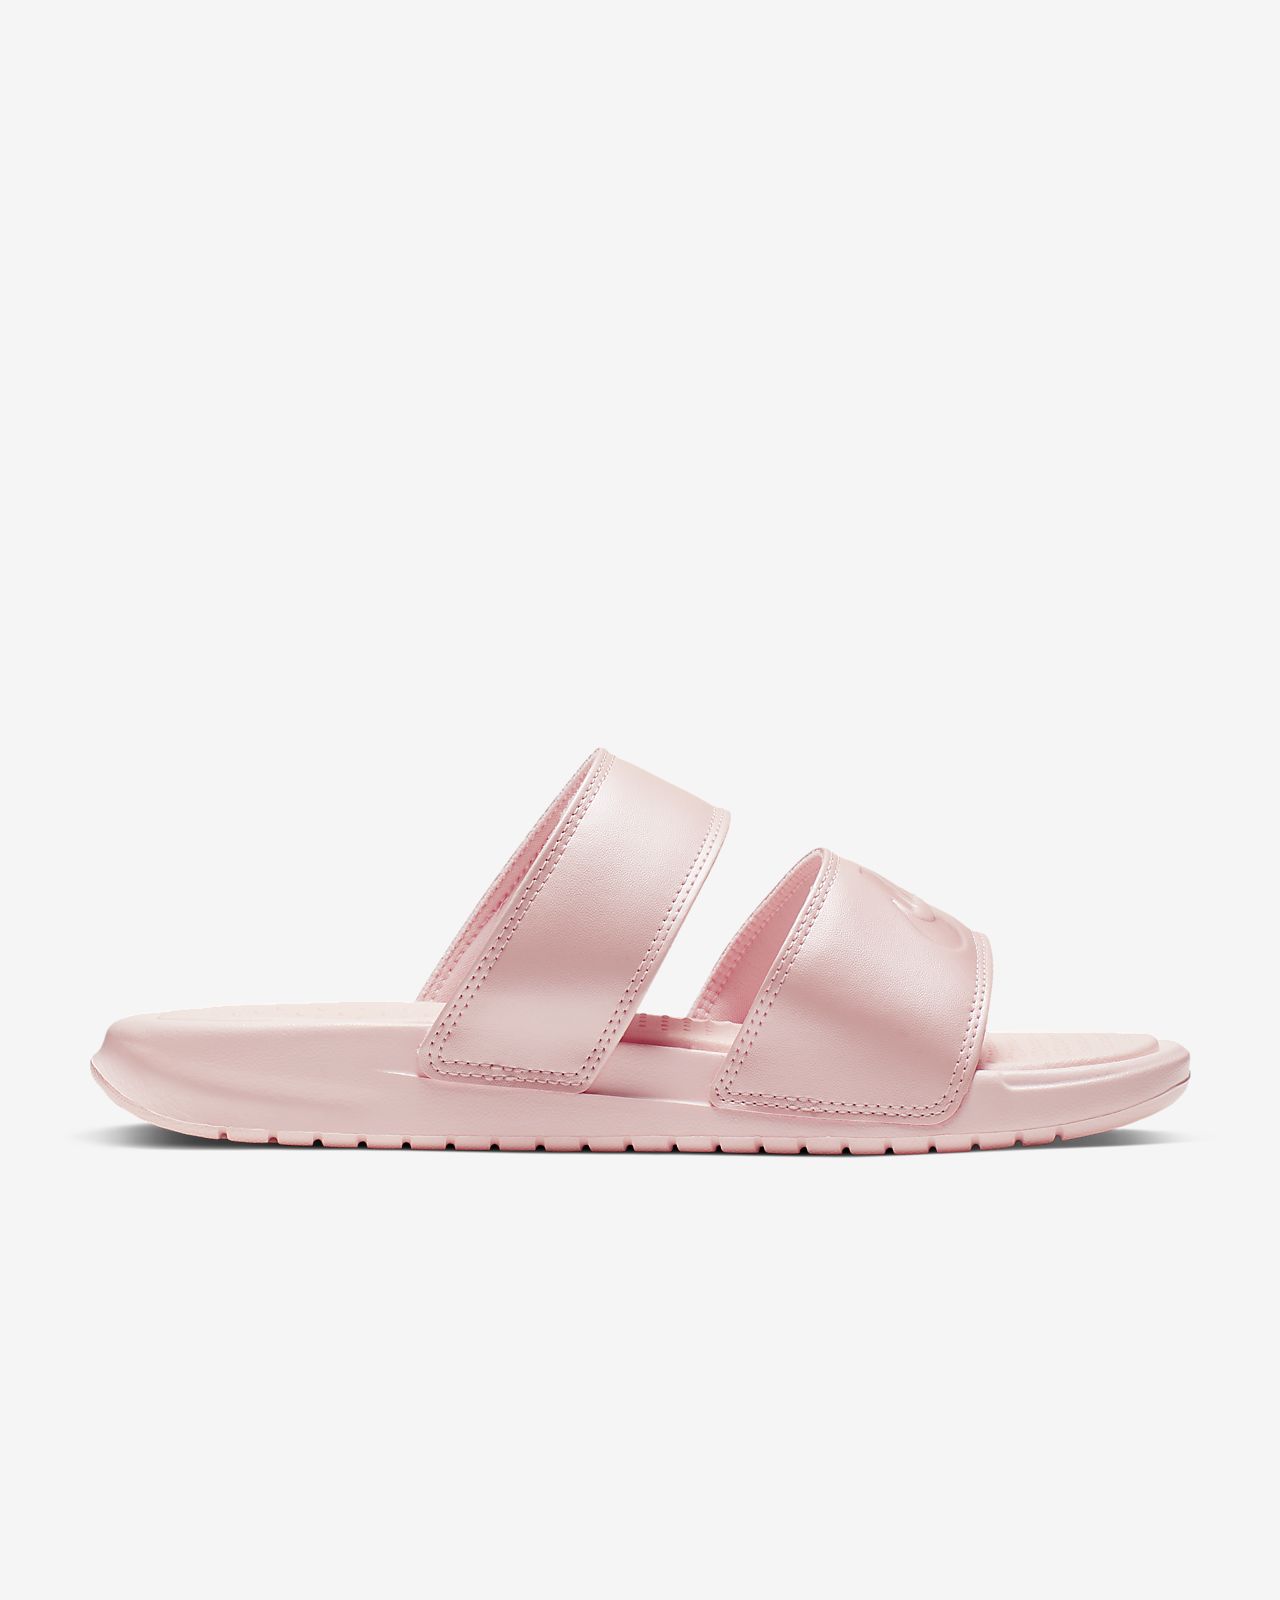 nike sandals with strap on back